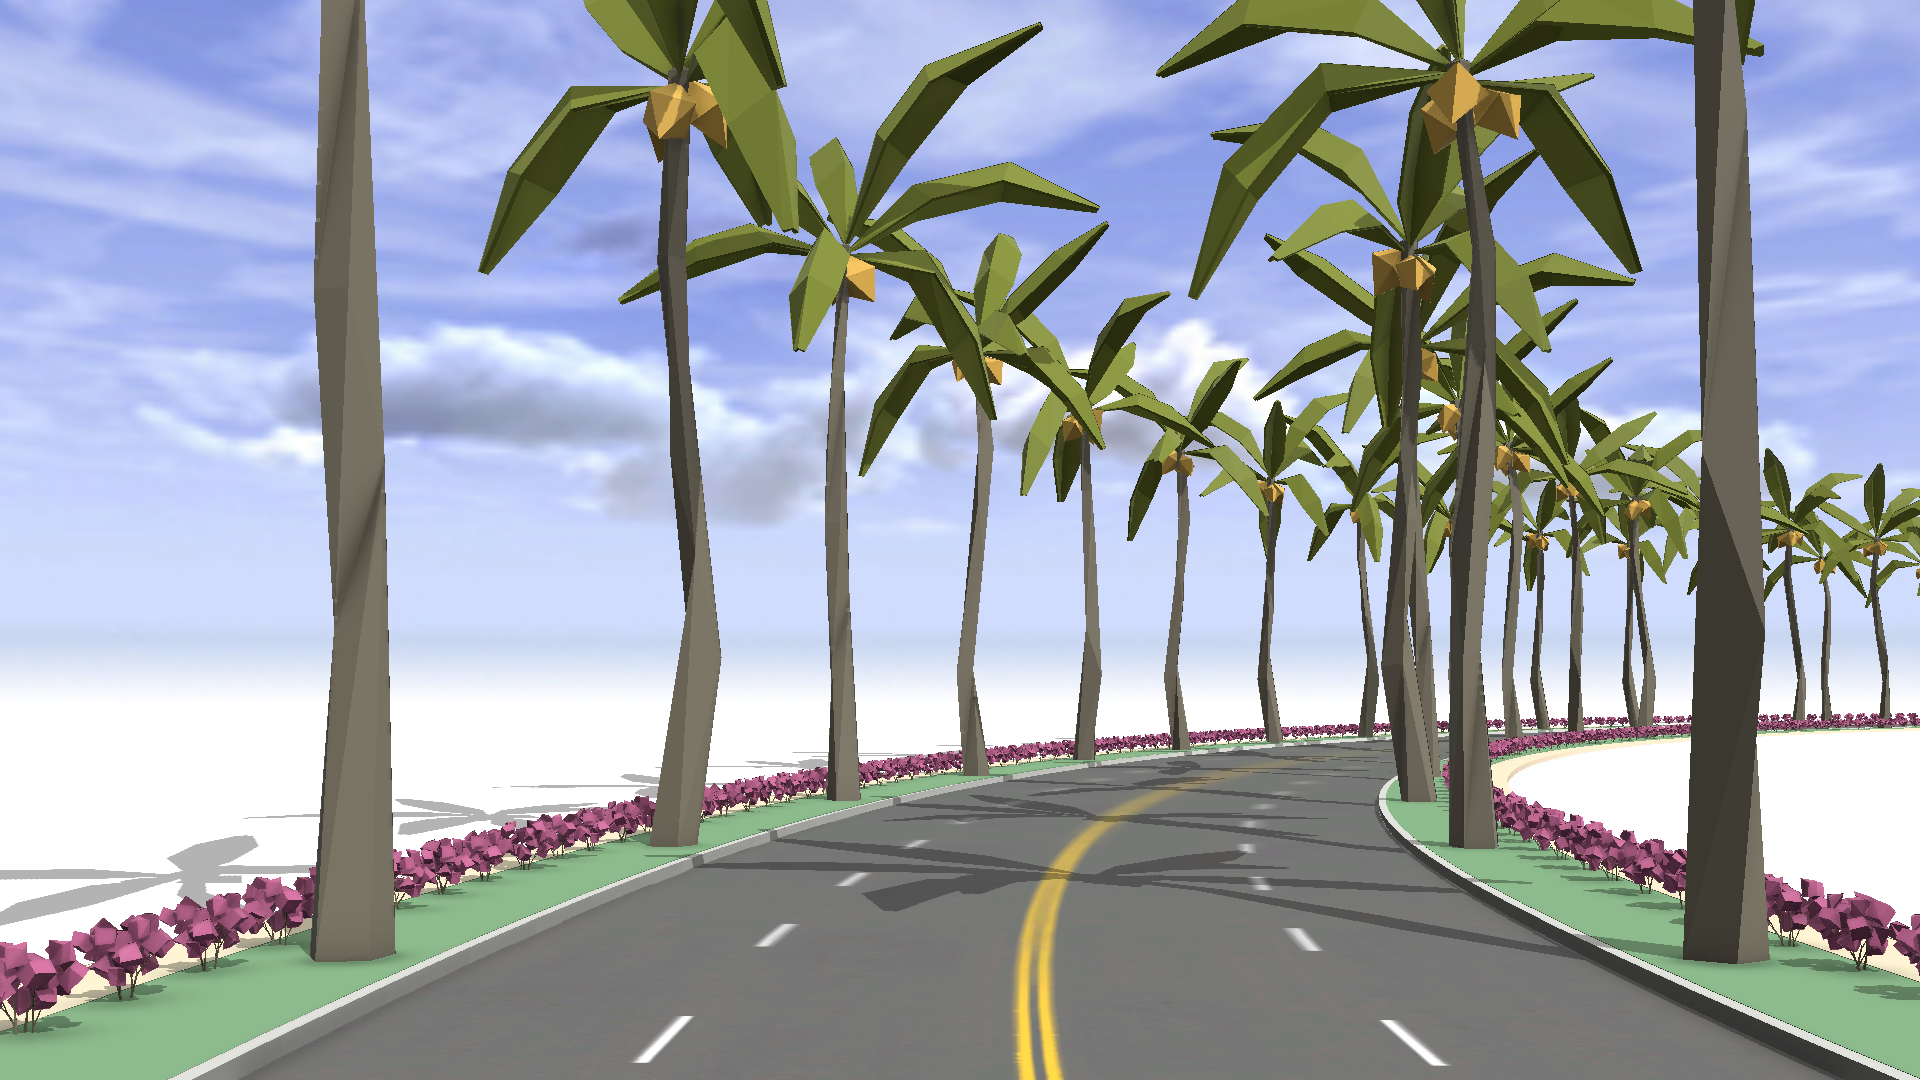 Palm trees along a road lined with bushes